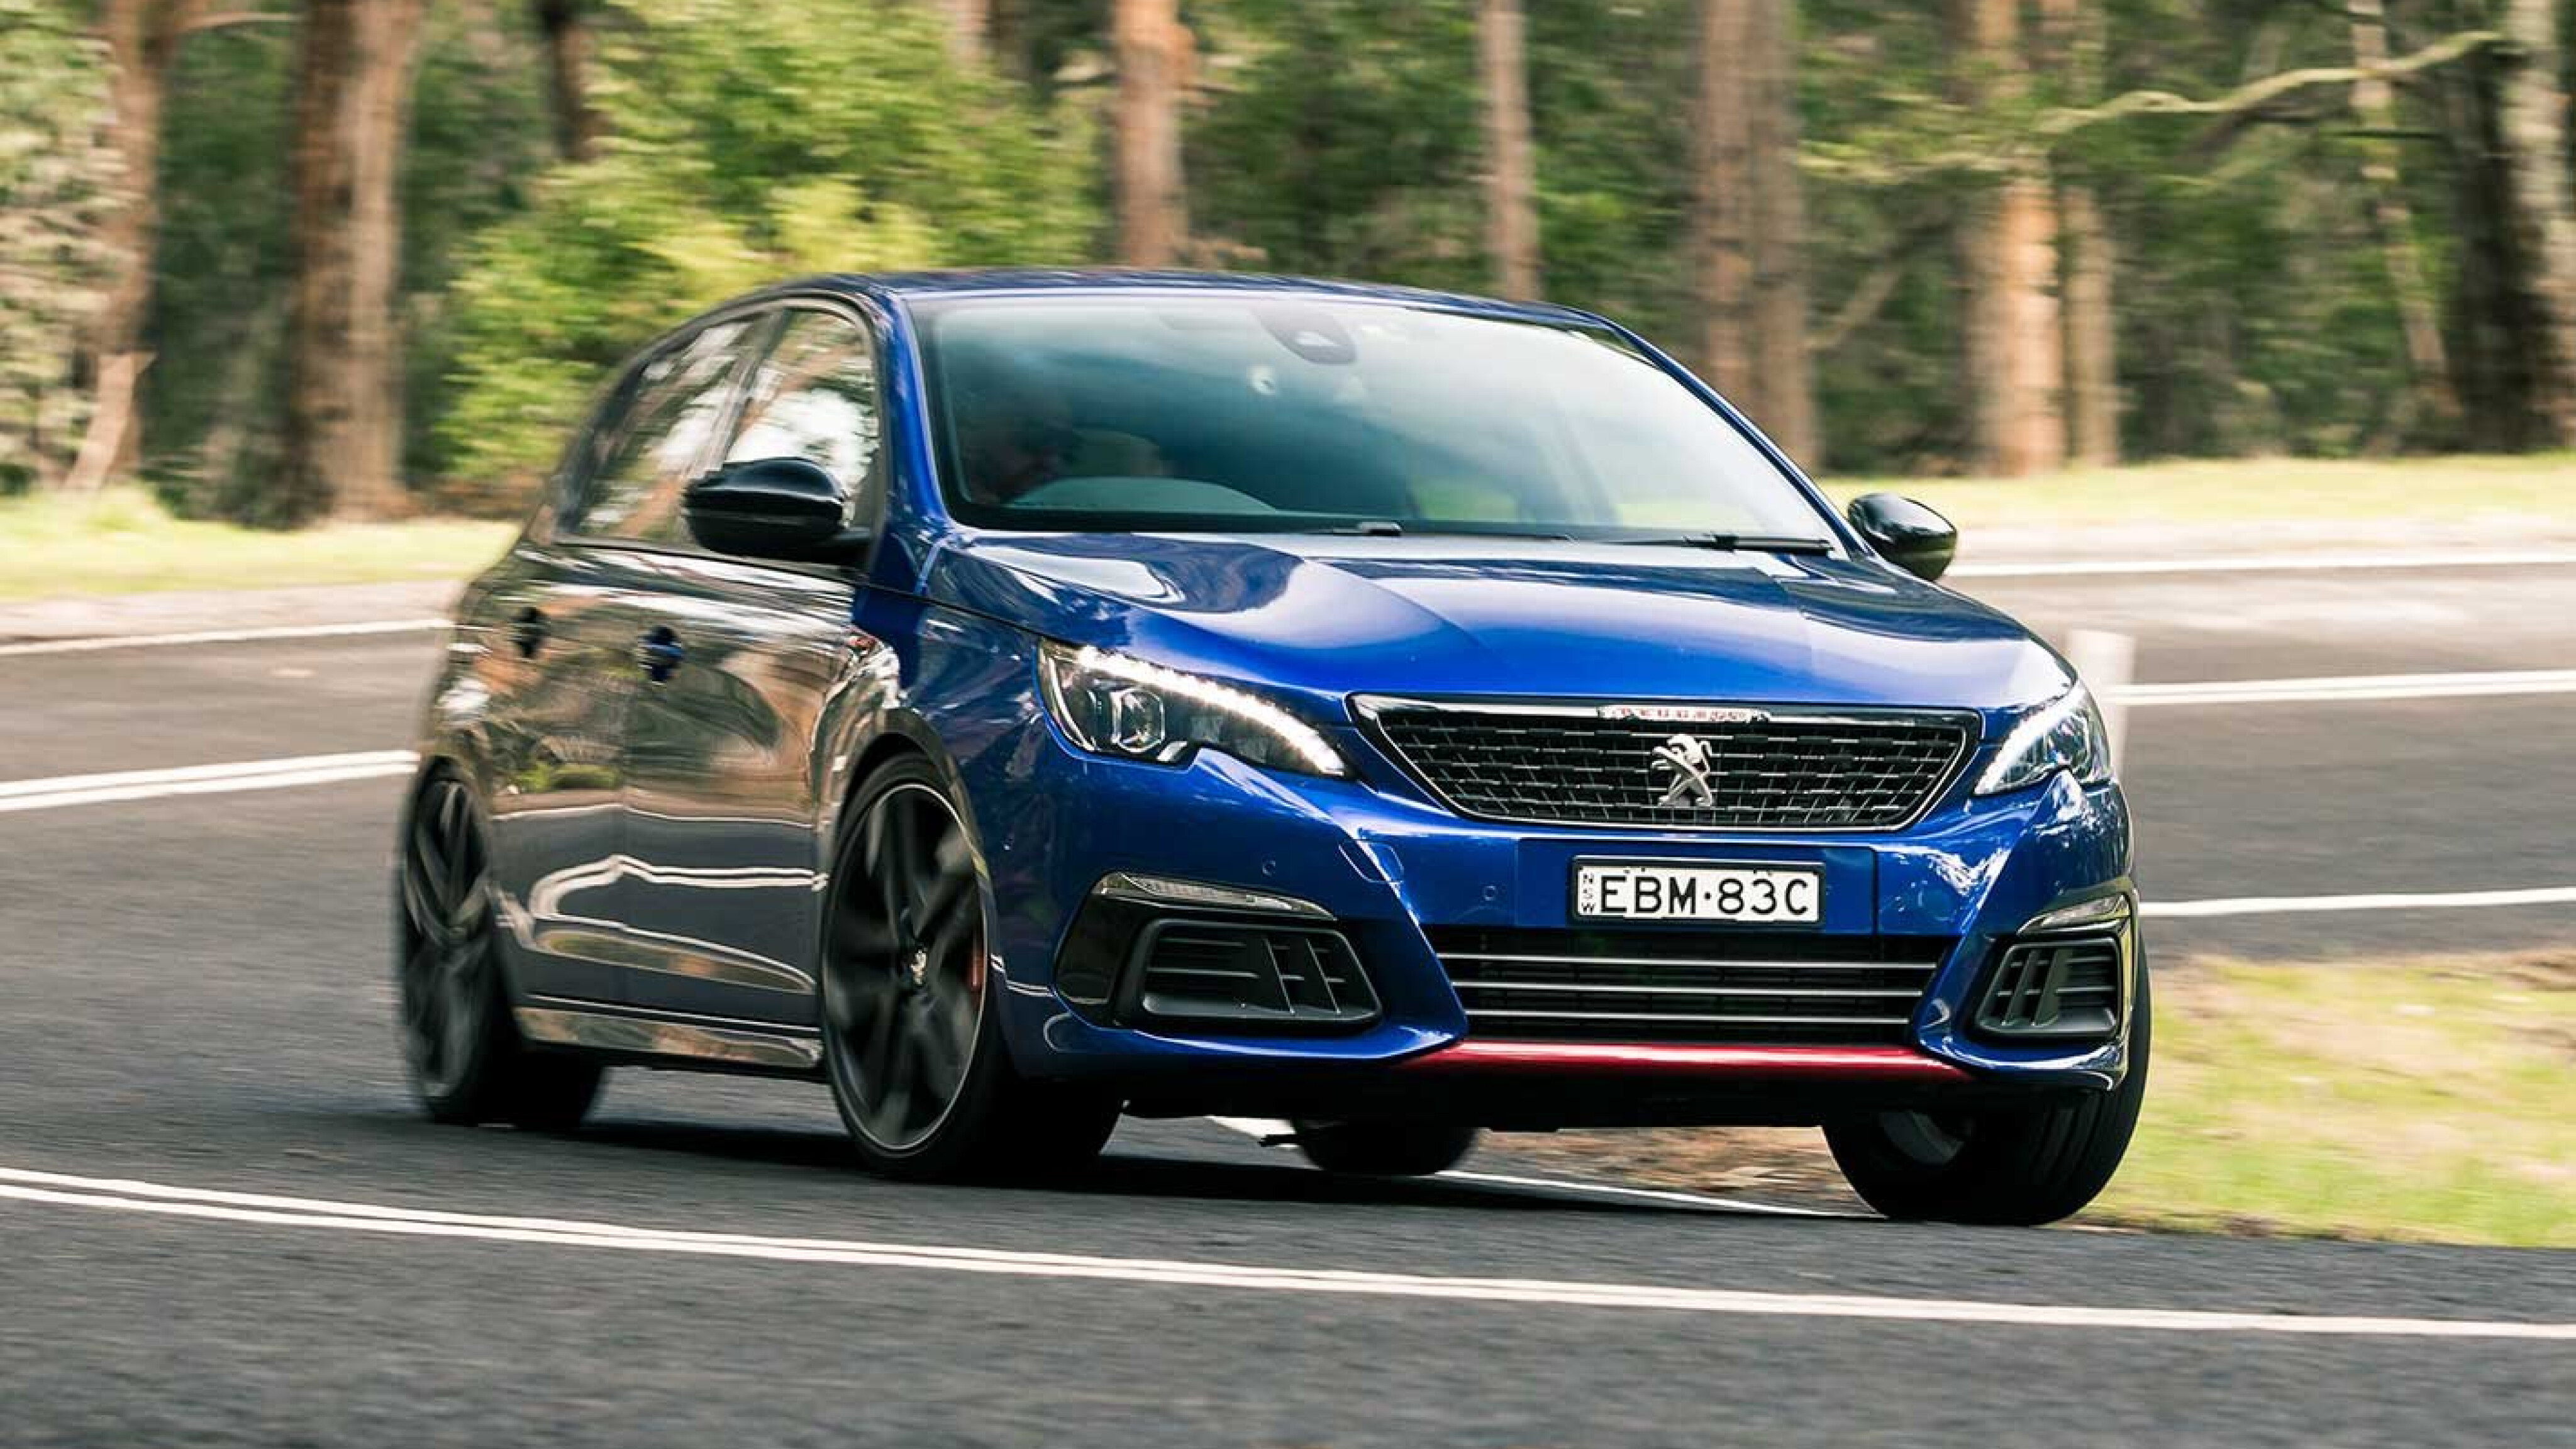 Peugeot 308 GTi review - price, specs and 0-60 time